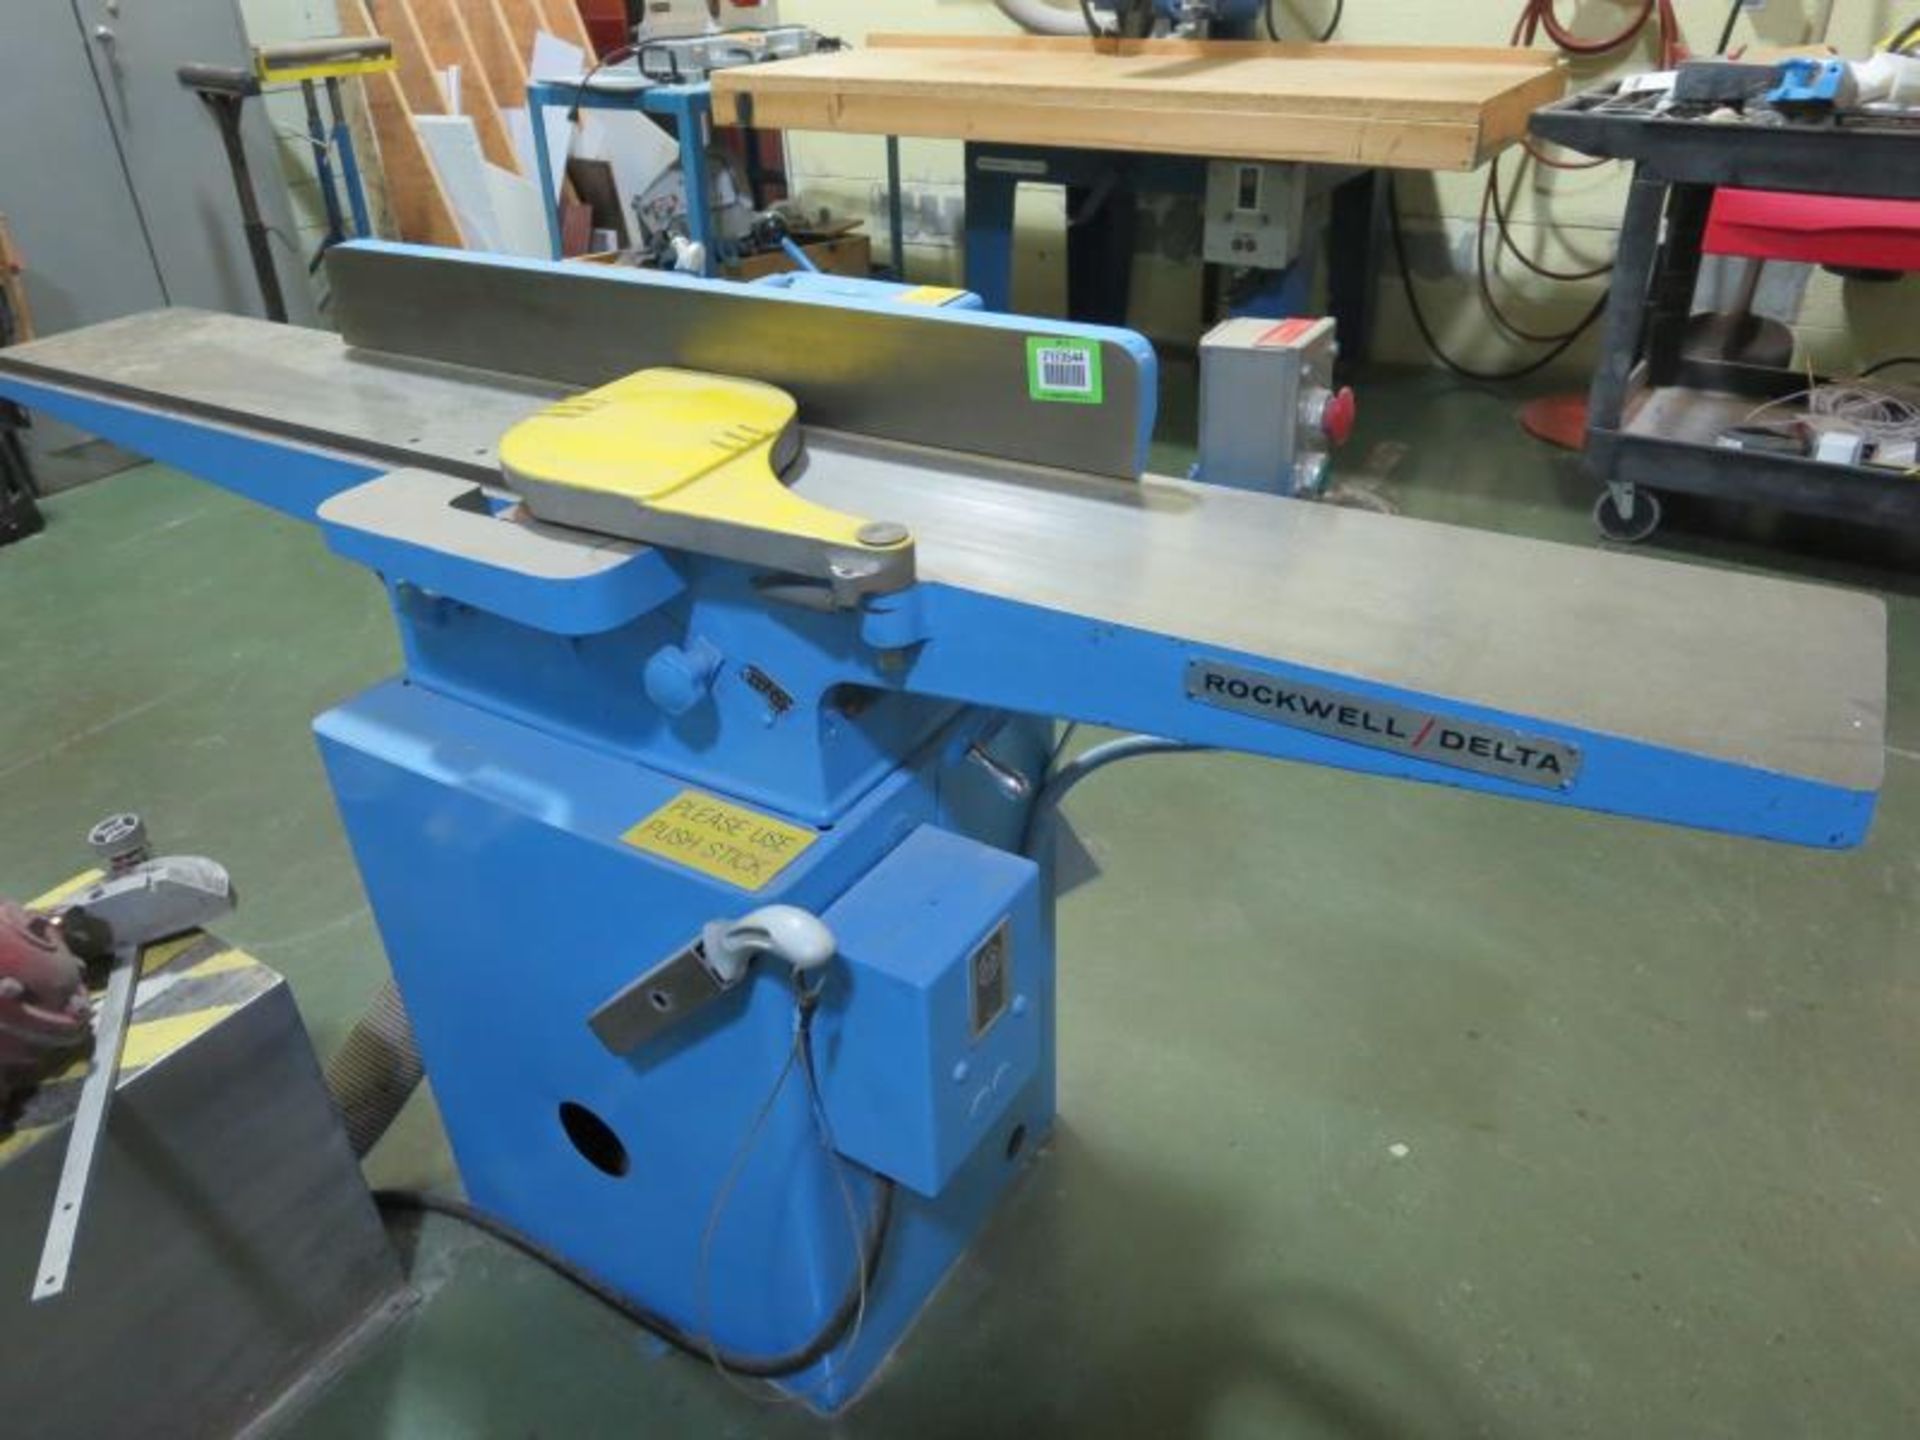 Rockwell/ Delta 37-315 8" Jointer; 9" x 66" bed, 3ph 480v. SN# EE4589. HIT# 2123544. Loc: 1110-1